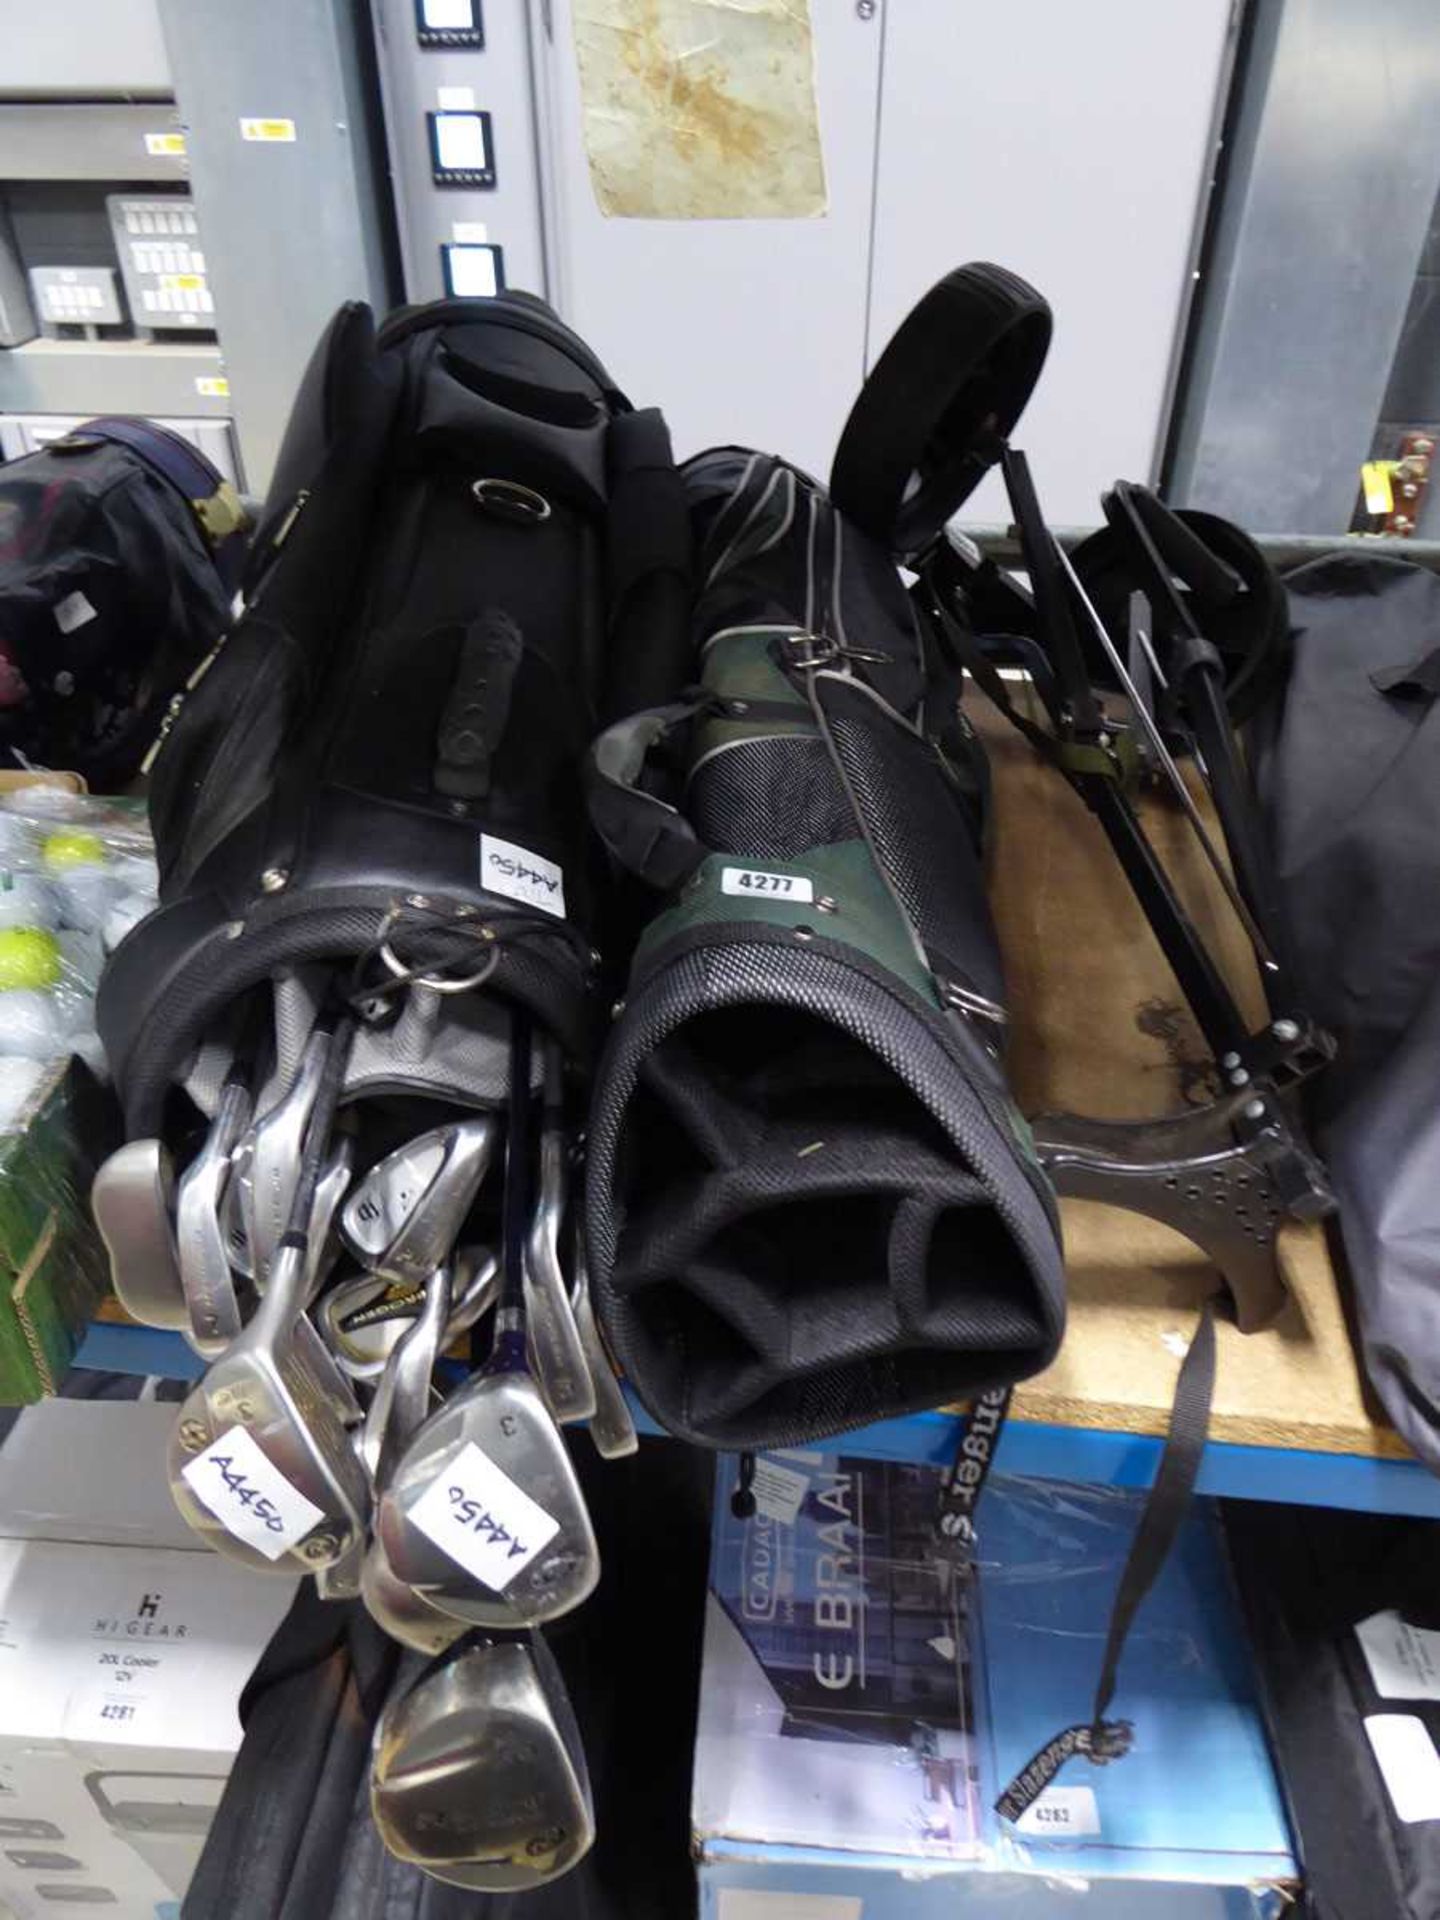 1 black and 1 green golf bag with trolley and clubs